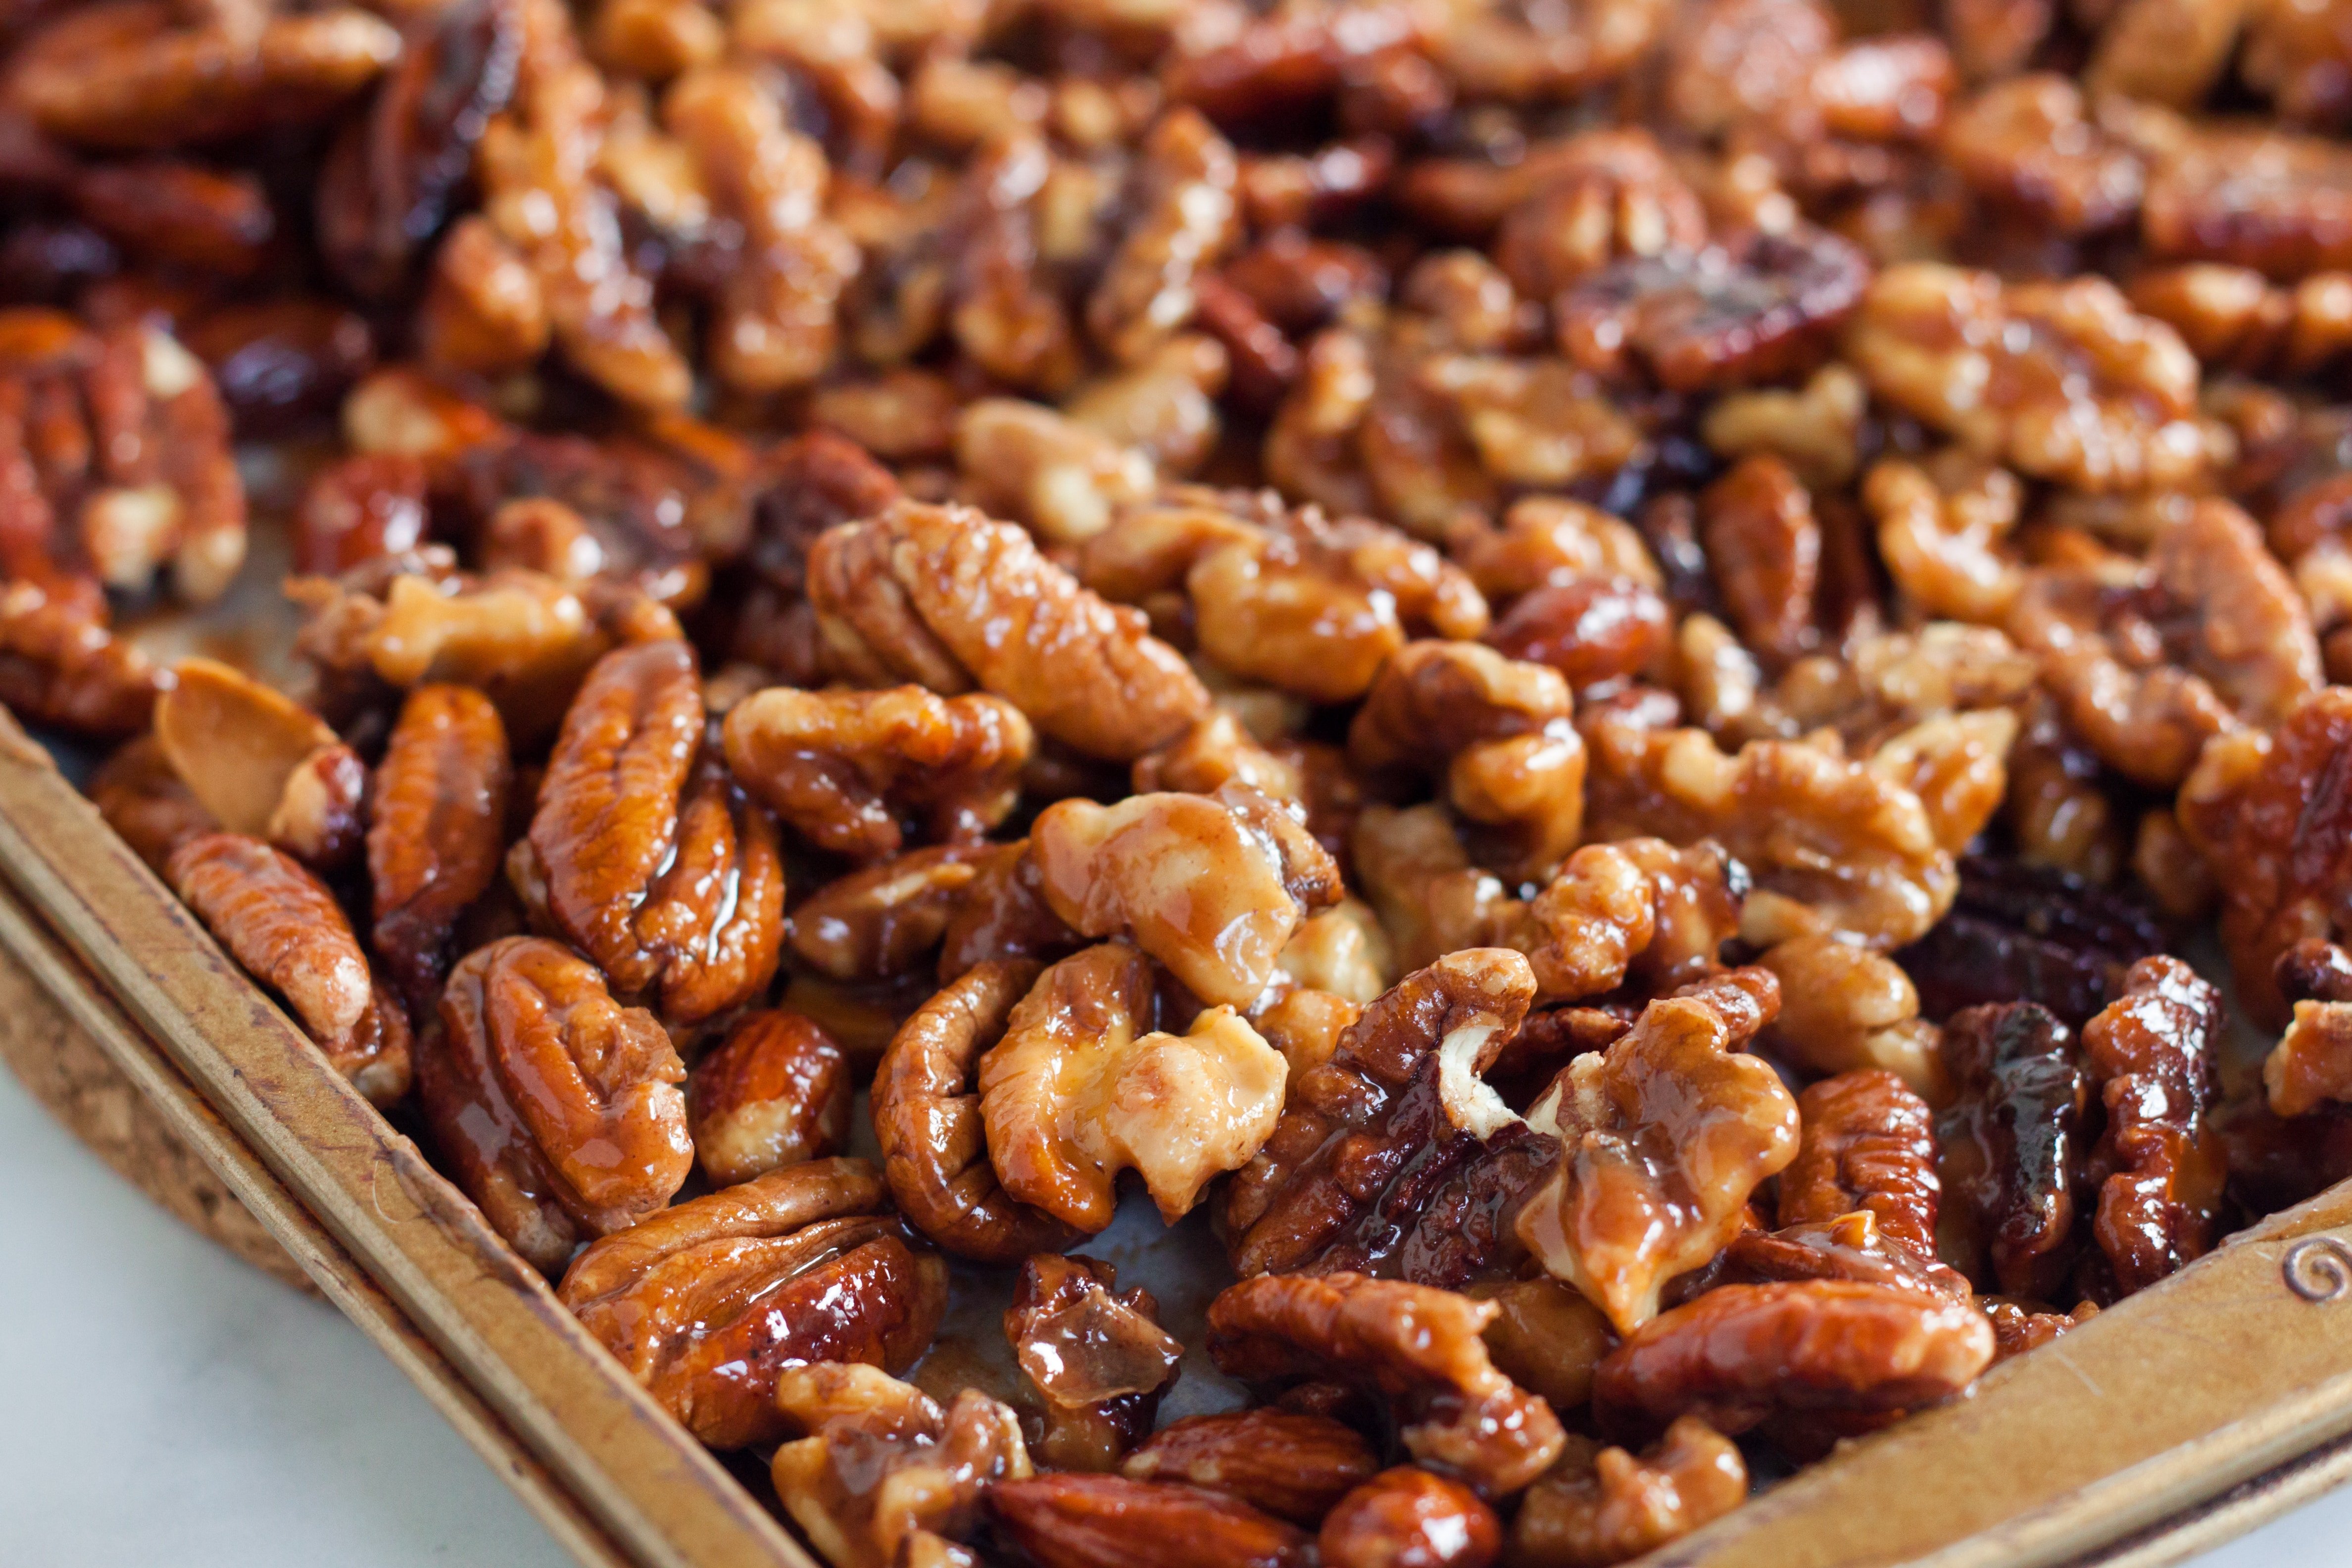 Baking sheet with almonds, walnuts, and pecans spread evenly with a drizzle of coconut oil and sweetener.